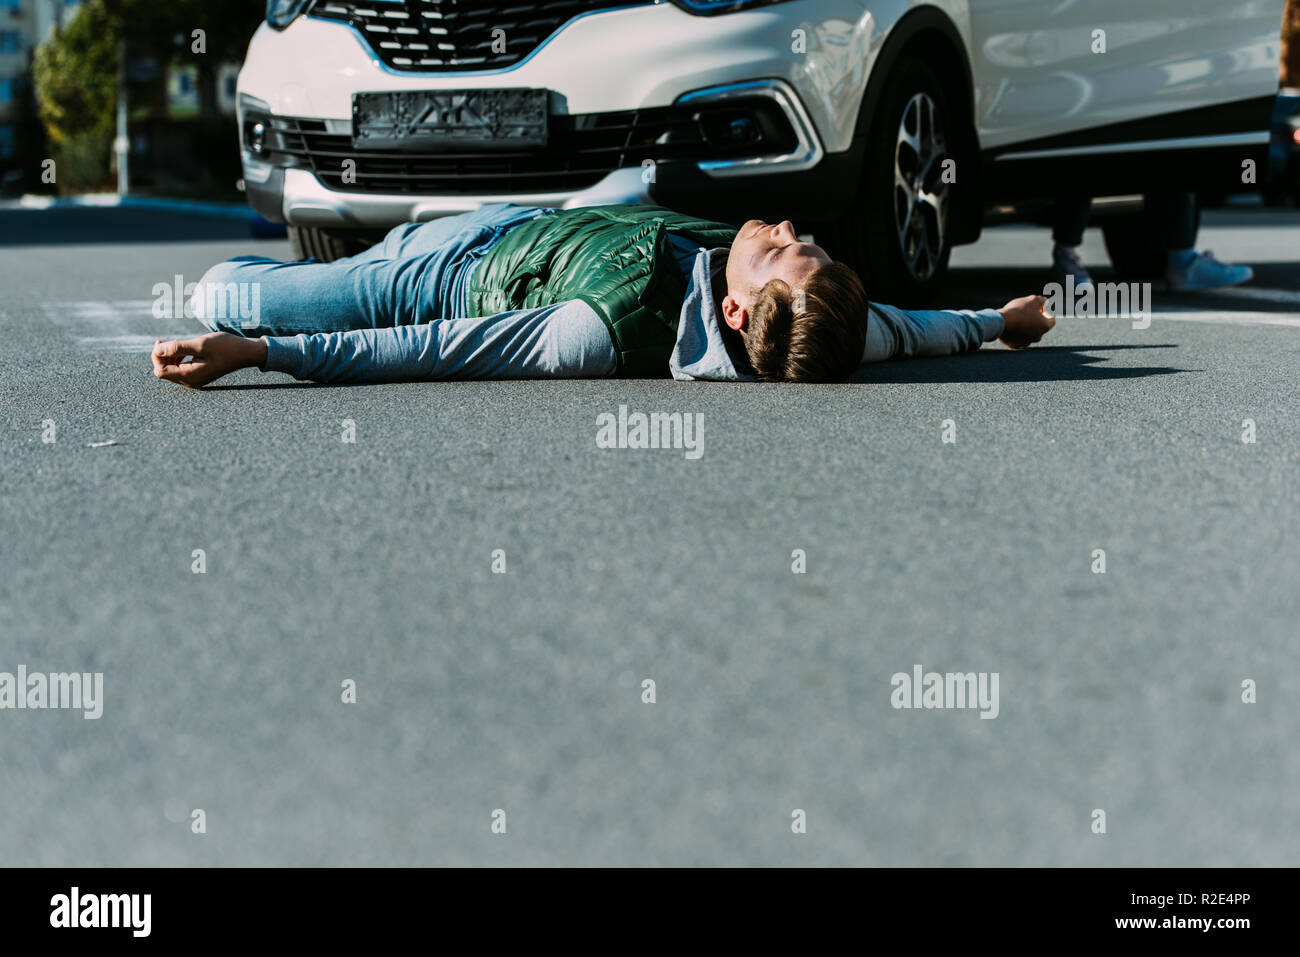 https://c8.alamy.com/comp/R2E4PP/surface-level-of-injured-young-man-lying-on-road-after-car-accident-R2E4PP.jpg